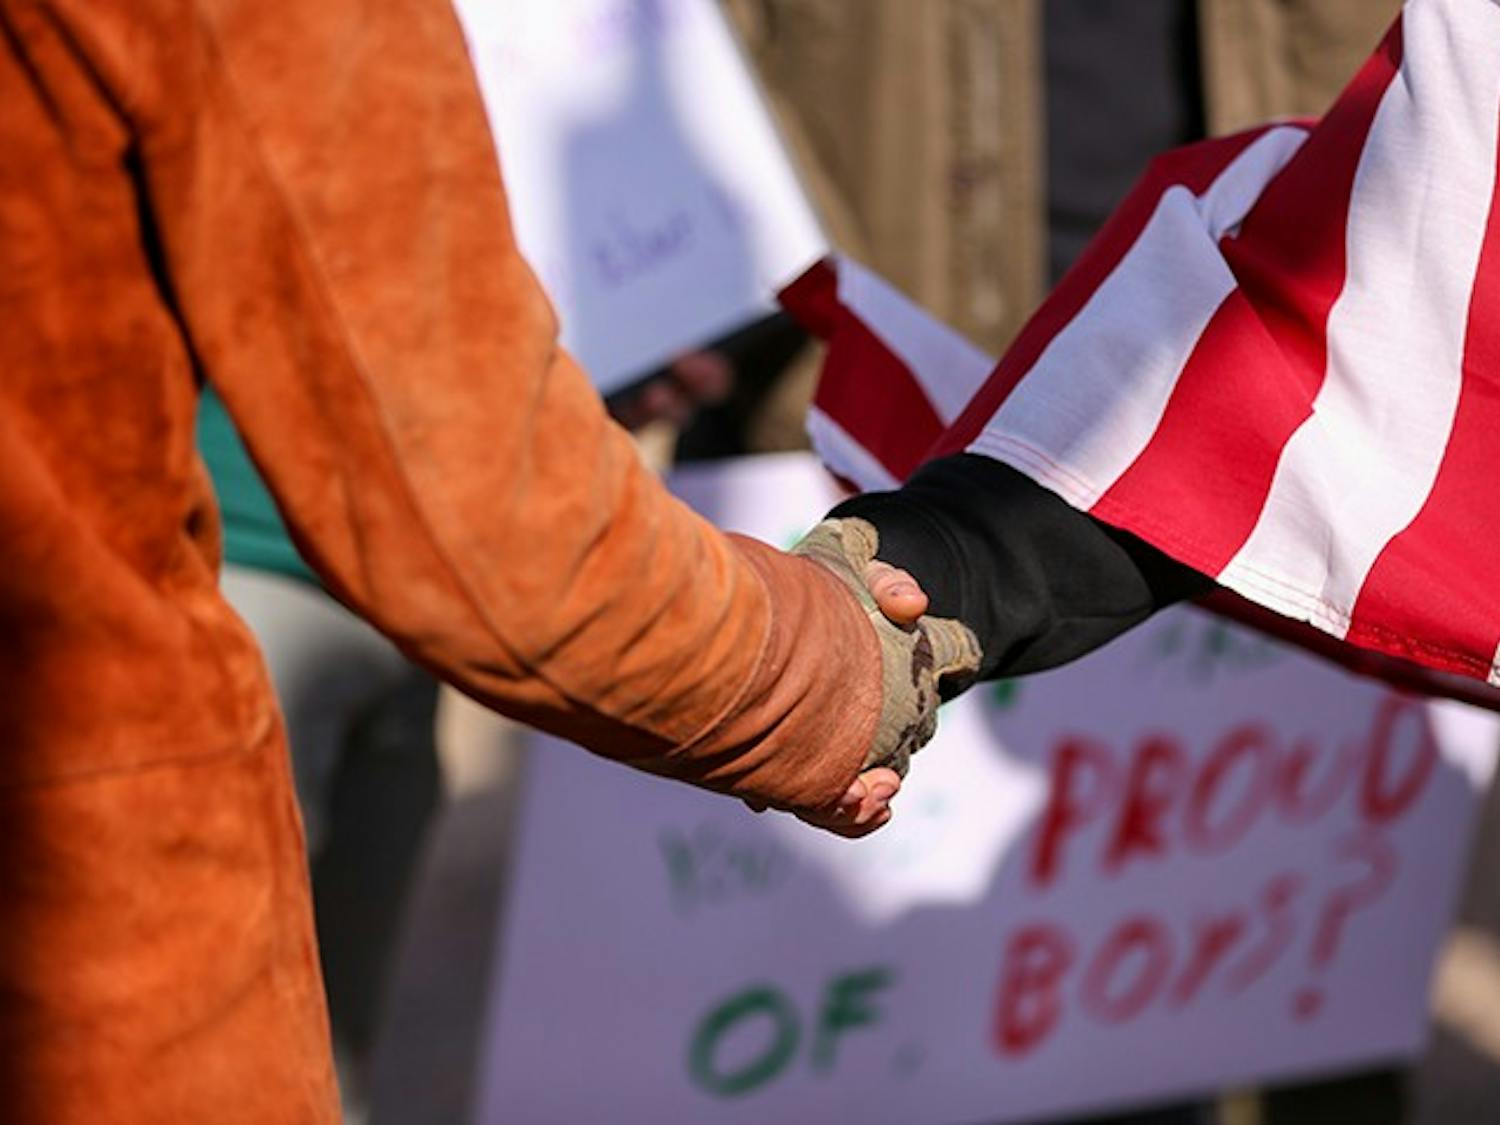 A member of the “Drive4America” caravan (right) shakes hands with a counter-protester (left) after the two groups met and voiced their frustrations.&nbsp;